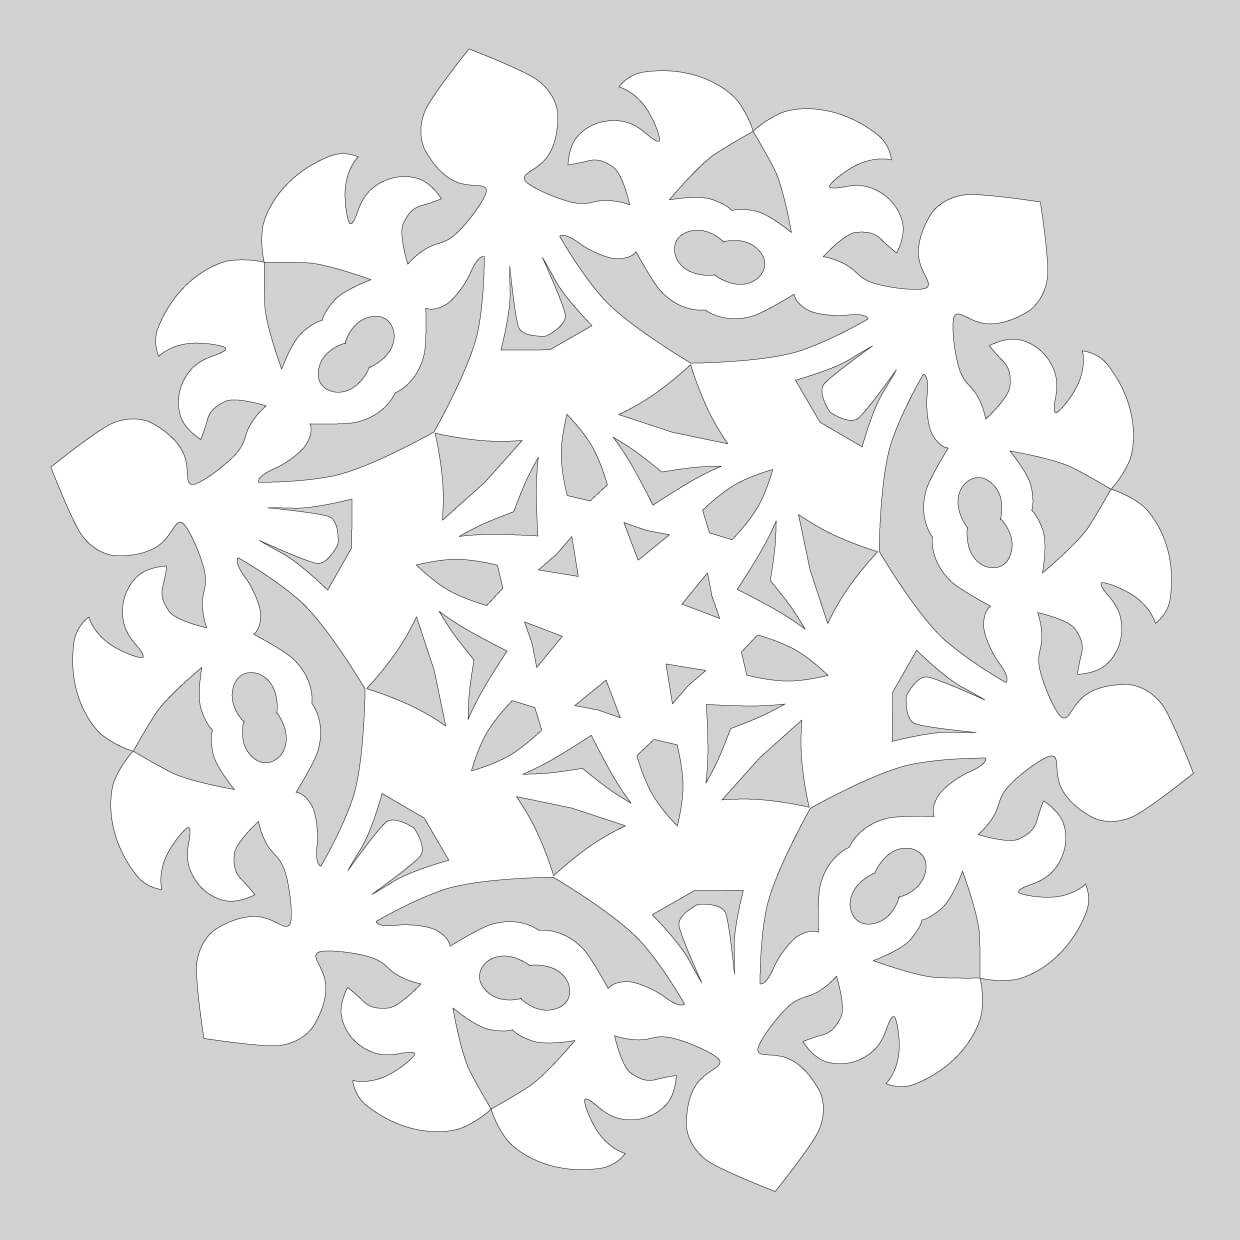 Blank Template To Draw A Pattern For Paper Snowflake | Free In Blank Snowflake Template